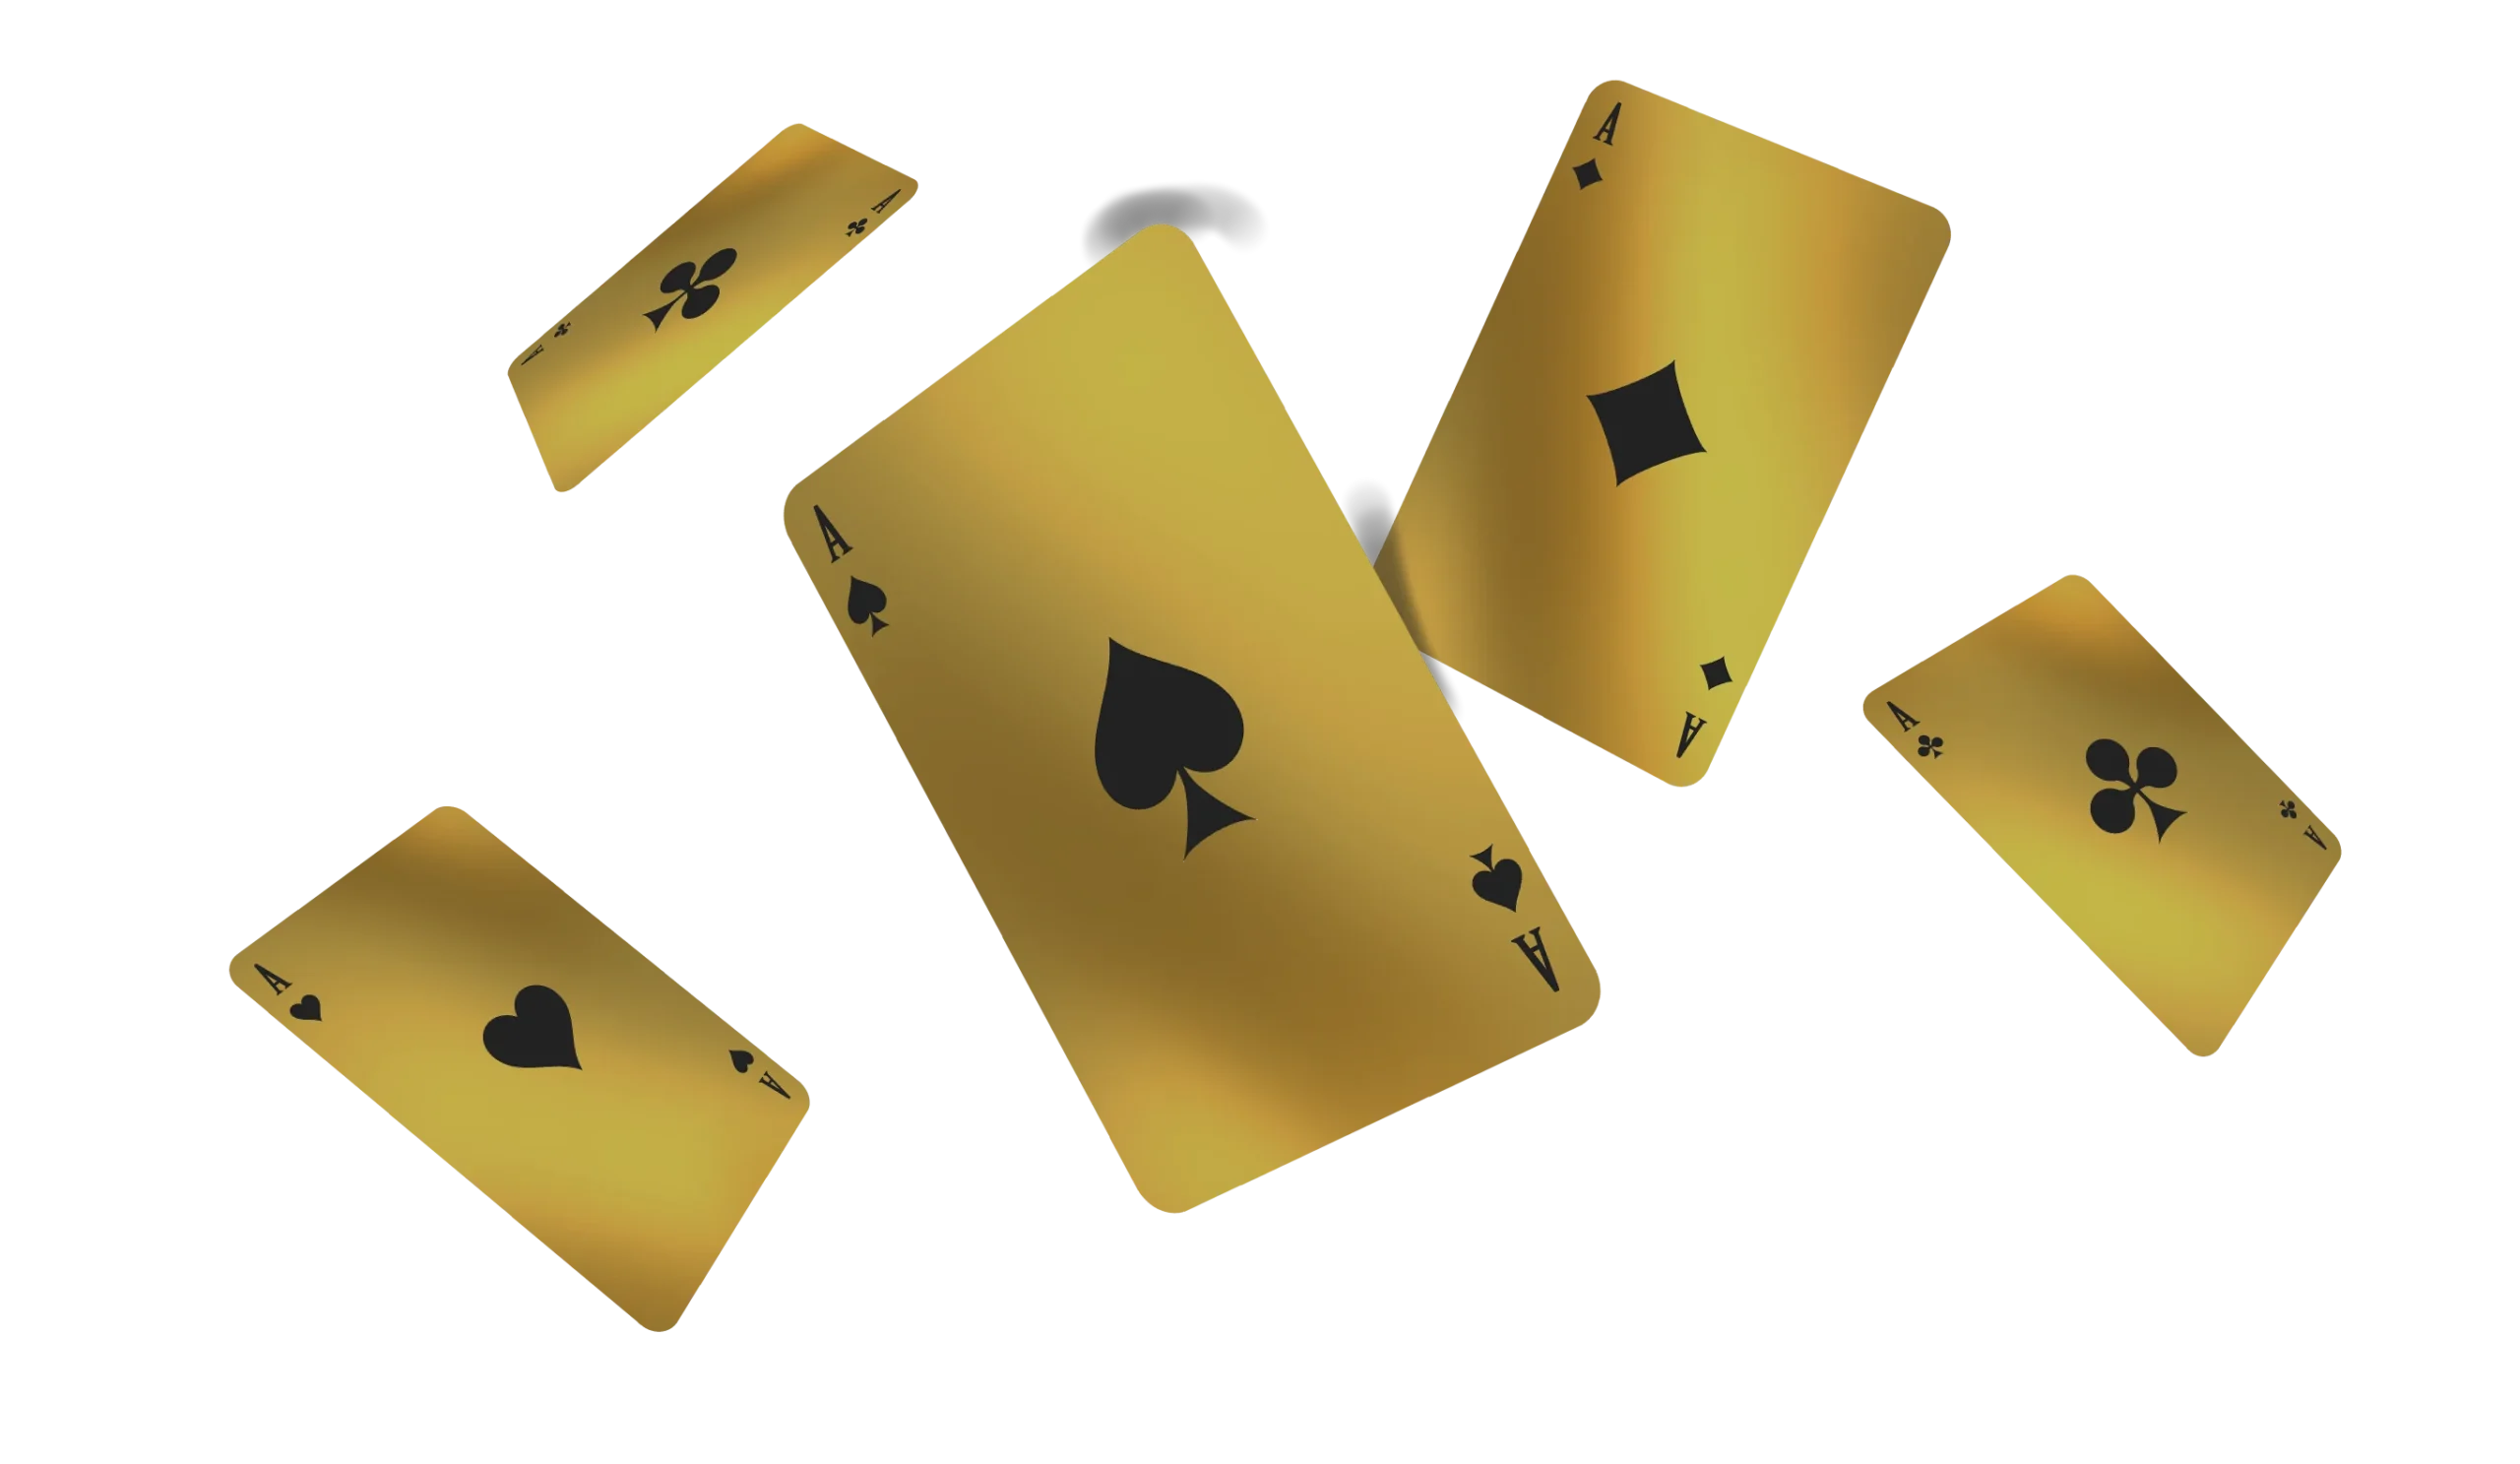 Golden playing cards with classic suits floating in a mysterious black void, symbolizing chance and skill in card games.